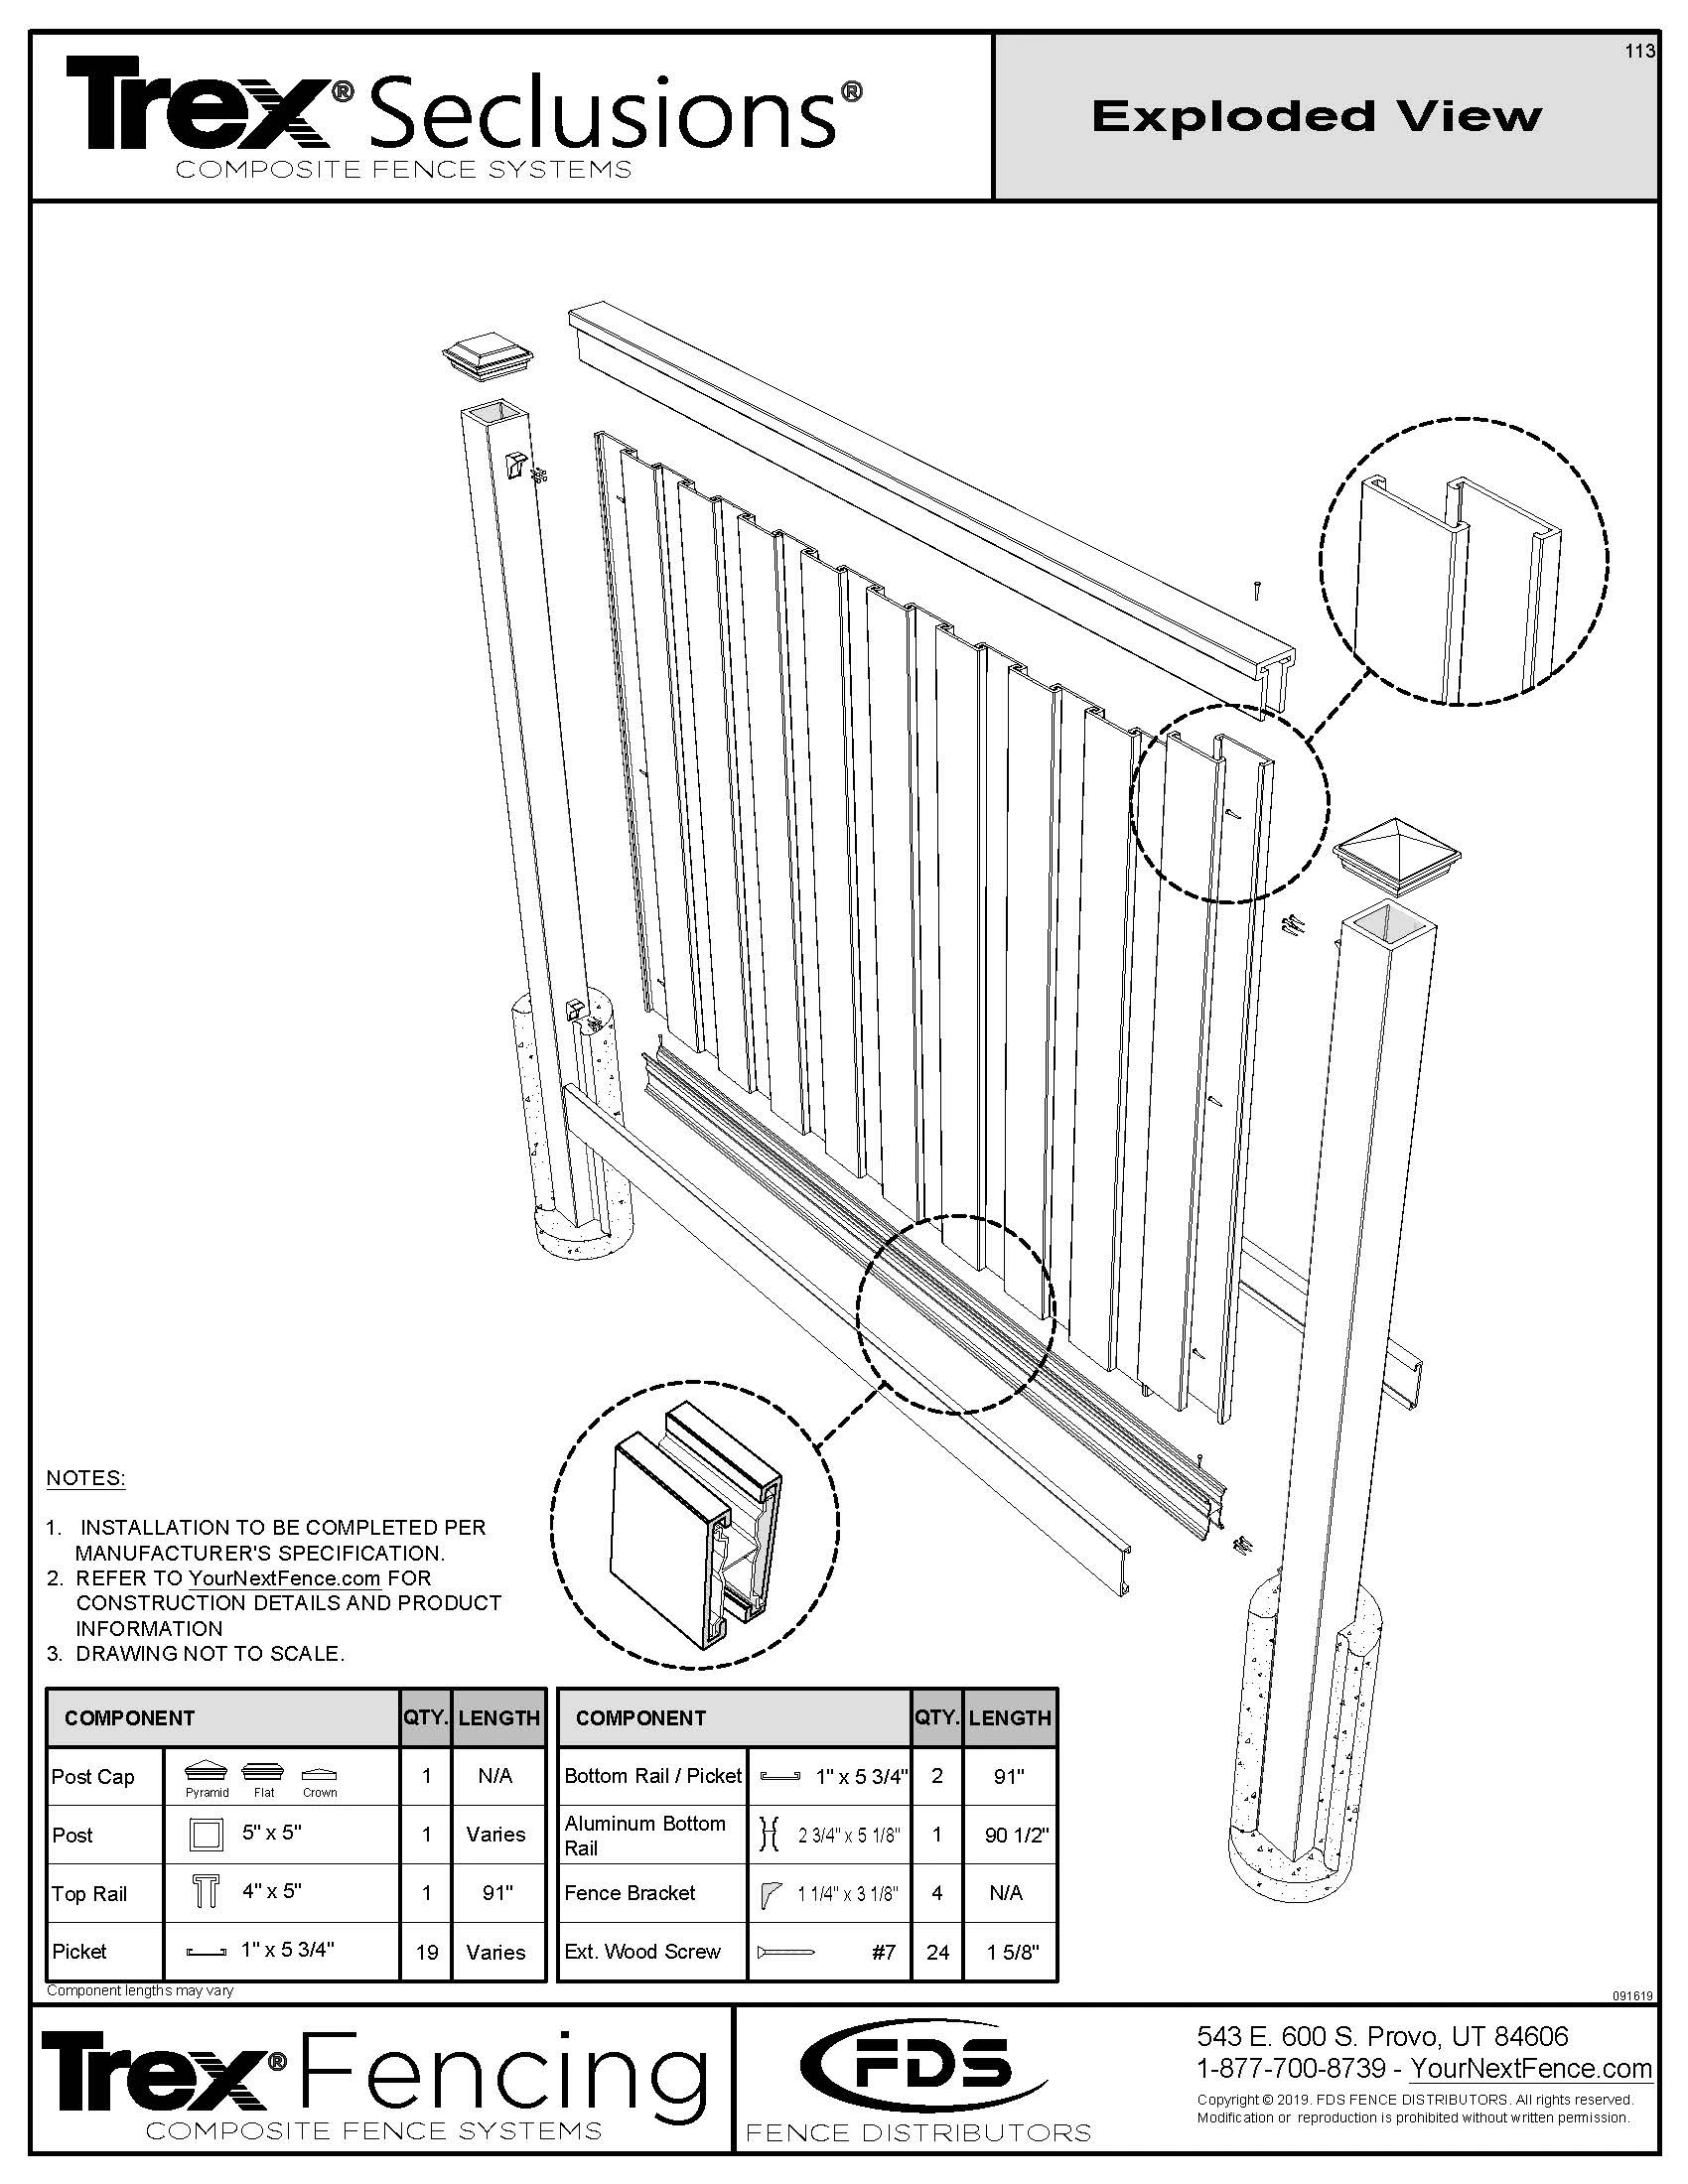 Trex Seclusions Fence Panel Kit - 5-ft. Tall 9